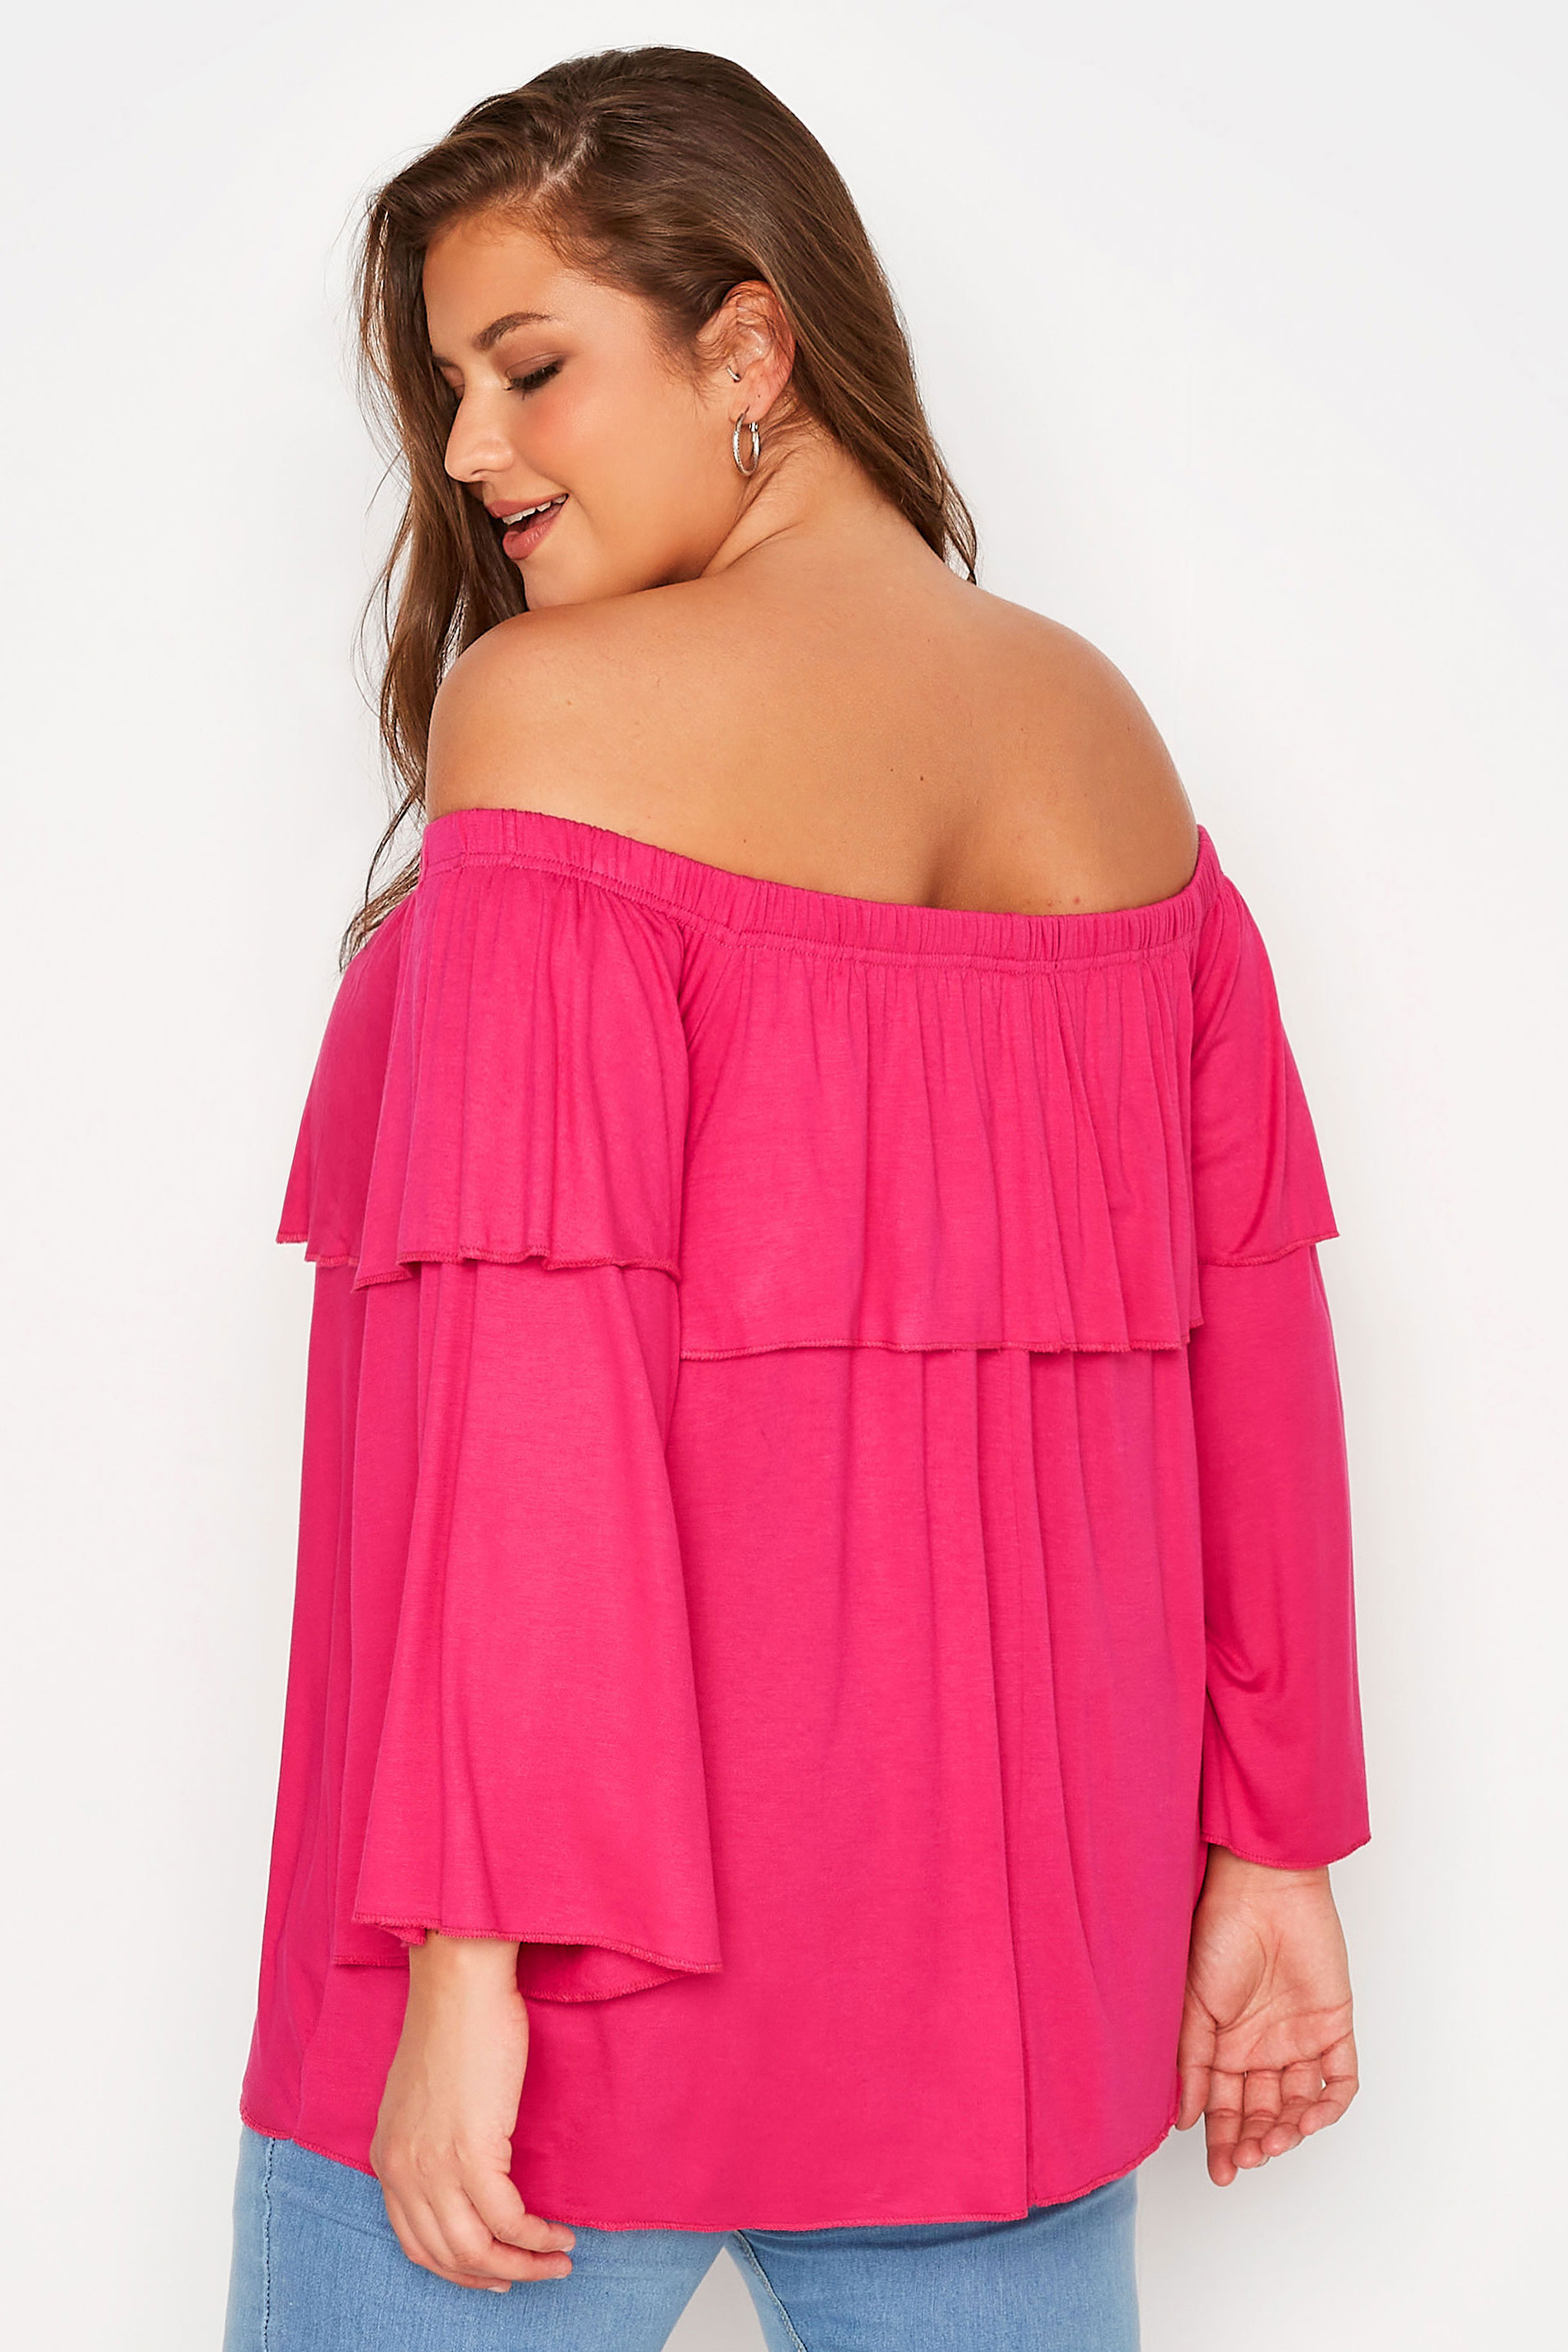 LIMITED COLLECTION Plus Size Hot Pink Frill Bardot Top | Yours Clothing 3